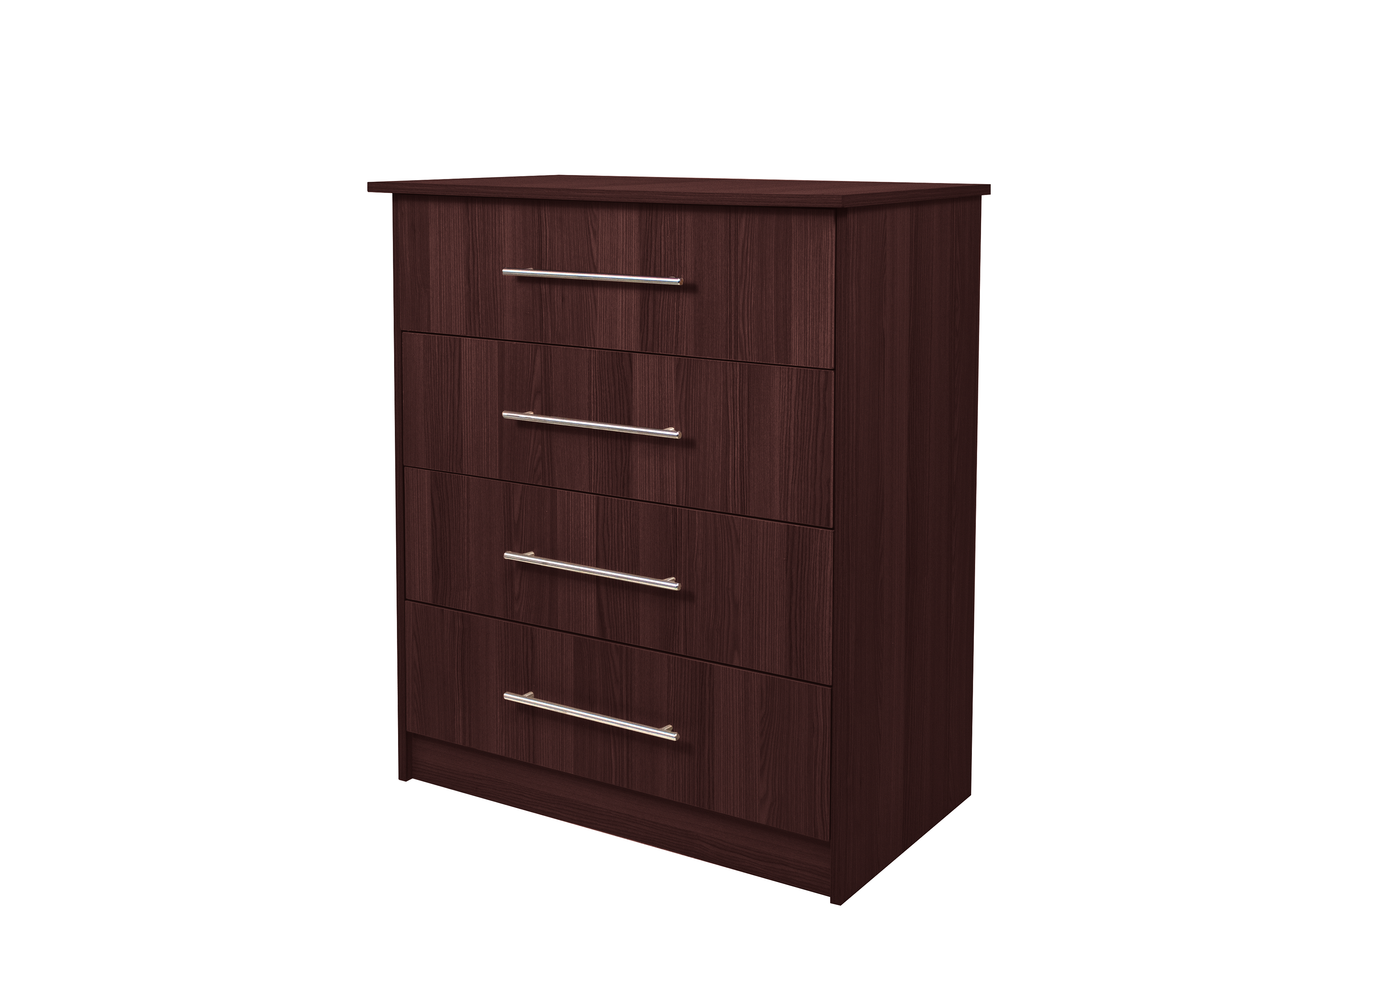 Tosh Chest Of Drawers